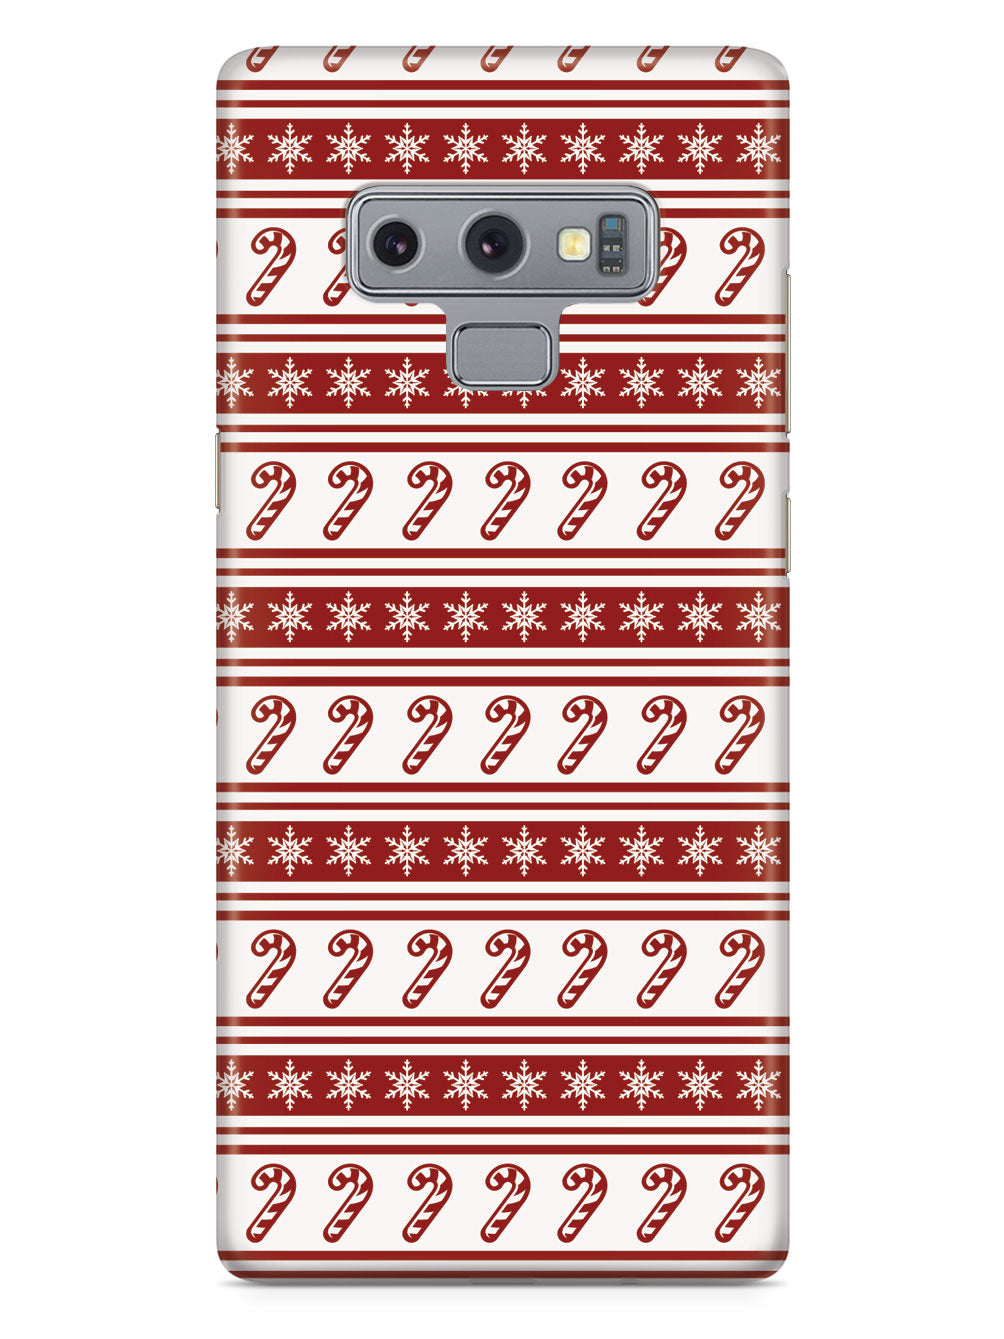 Candy Cane Snow Flakes Pattern - White Case